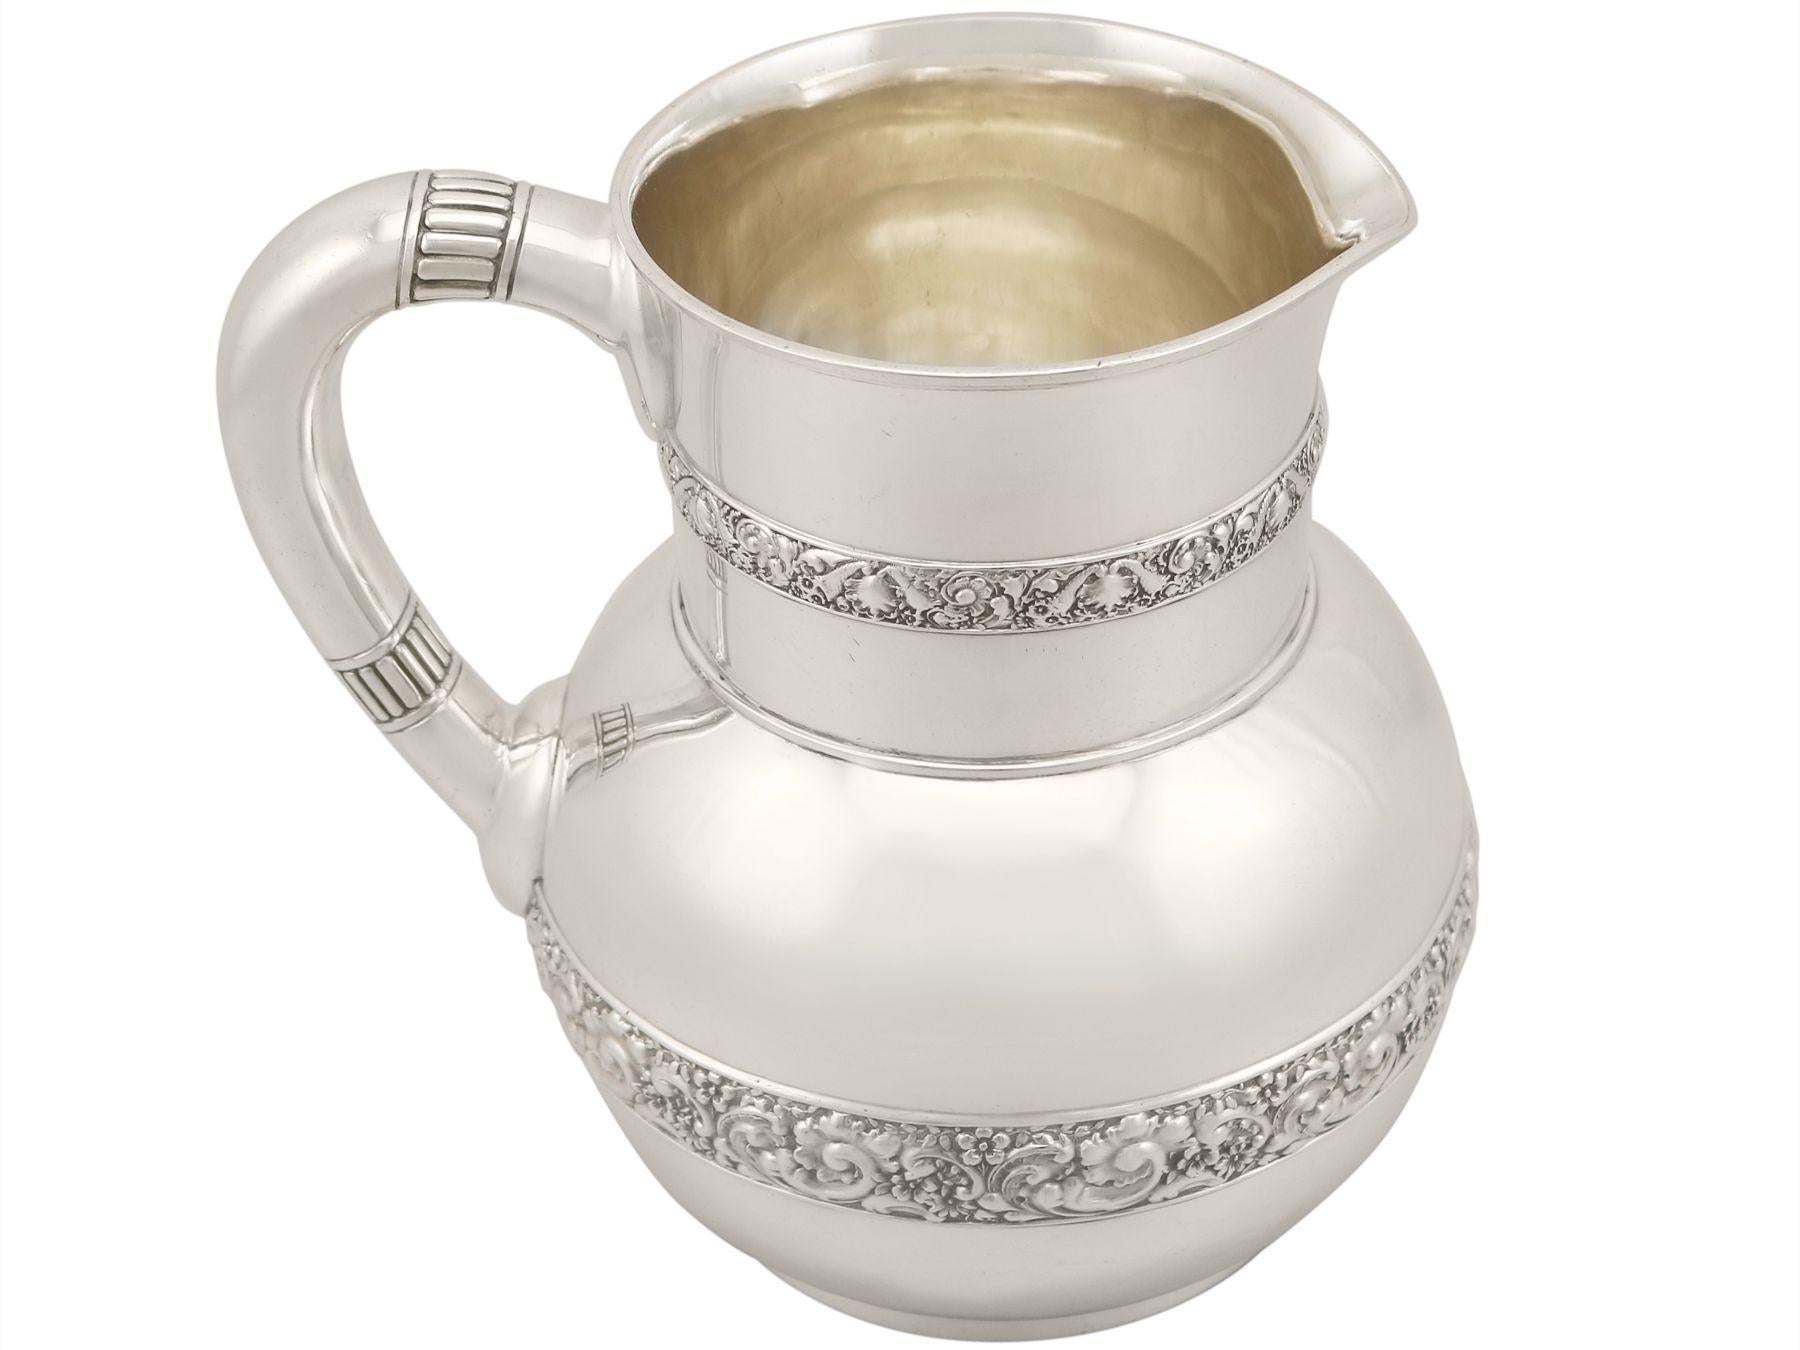 An exceptional, fine and impressive antique American sterling silver water pitcher jug made by Tiffany & Co; part of our dining silverware collection

This exceptional antique American sterling silver jug has a circular bulbous form onto a